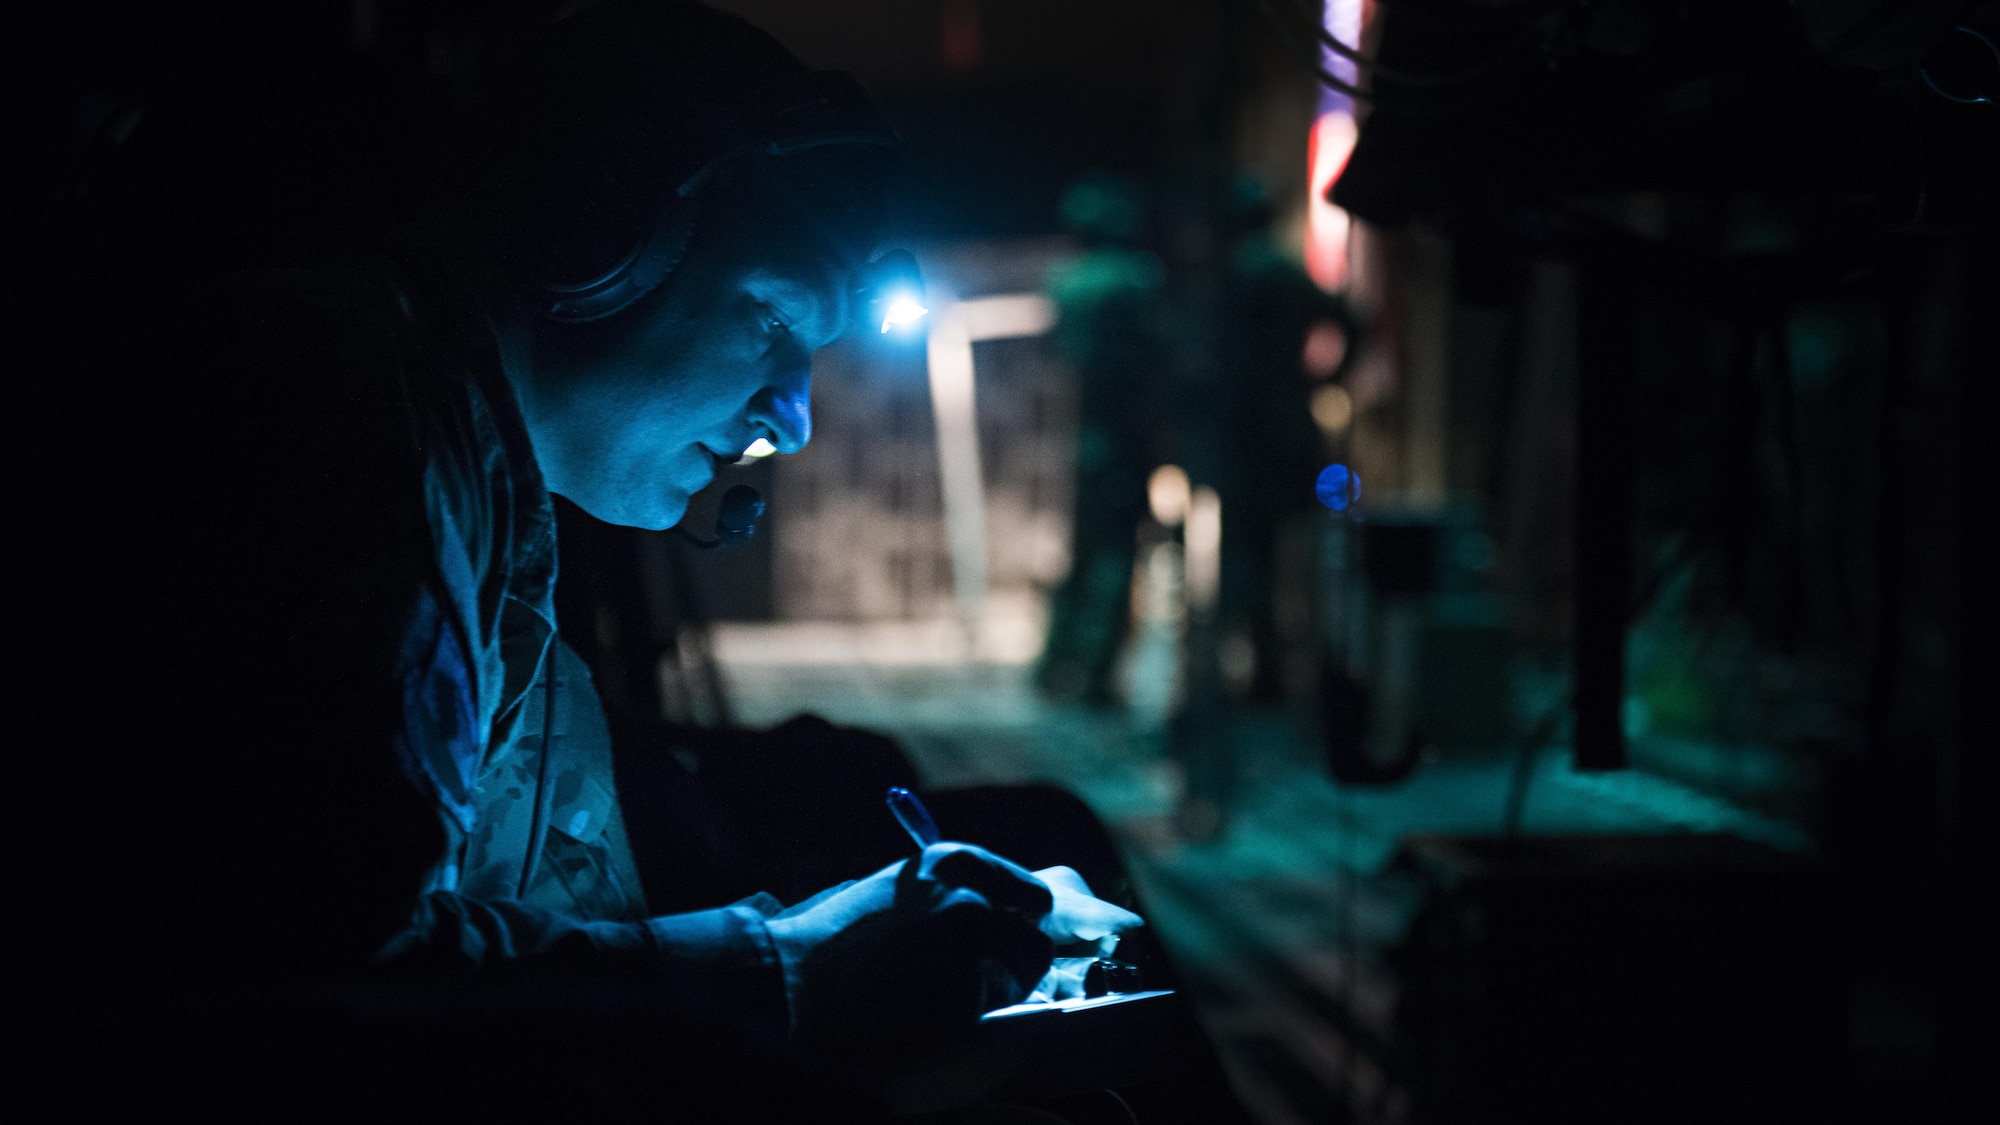 Capt. Alex Bedard, 455th Expeditionary Aeromedical Evacuation Squadron Critical Care Air Transport Team doctor, takes notes aboard a C-130J Hercules while transporting a patient from Kandahar Airfield to Bagram Airfield, Afghanistan, Feb. 22, 2017. Members of the 455th EAES transport critically ill or injured patients from austere locations throughout Afghanistan to receive a higher level of care. (U.S. Air Force photo by Staff Sgt. Katherine Spessa)